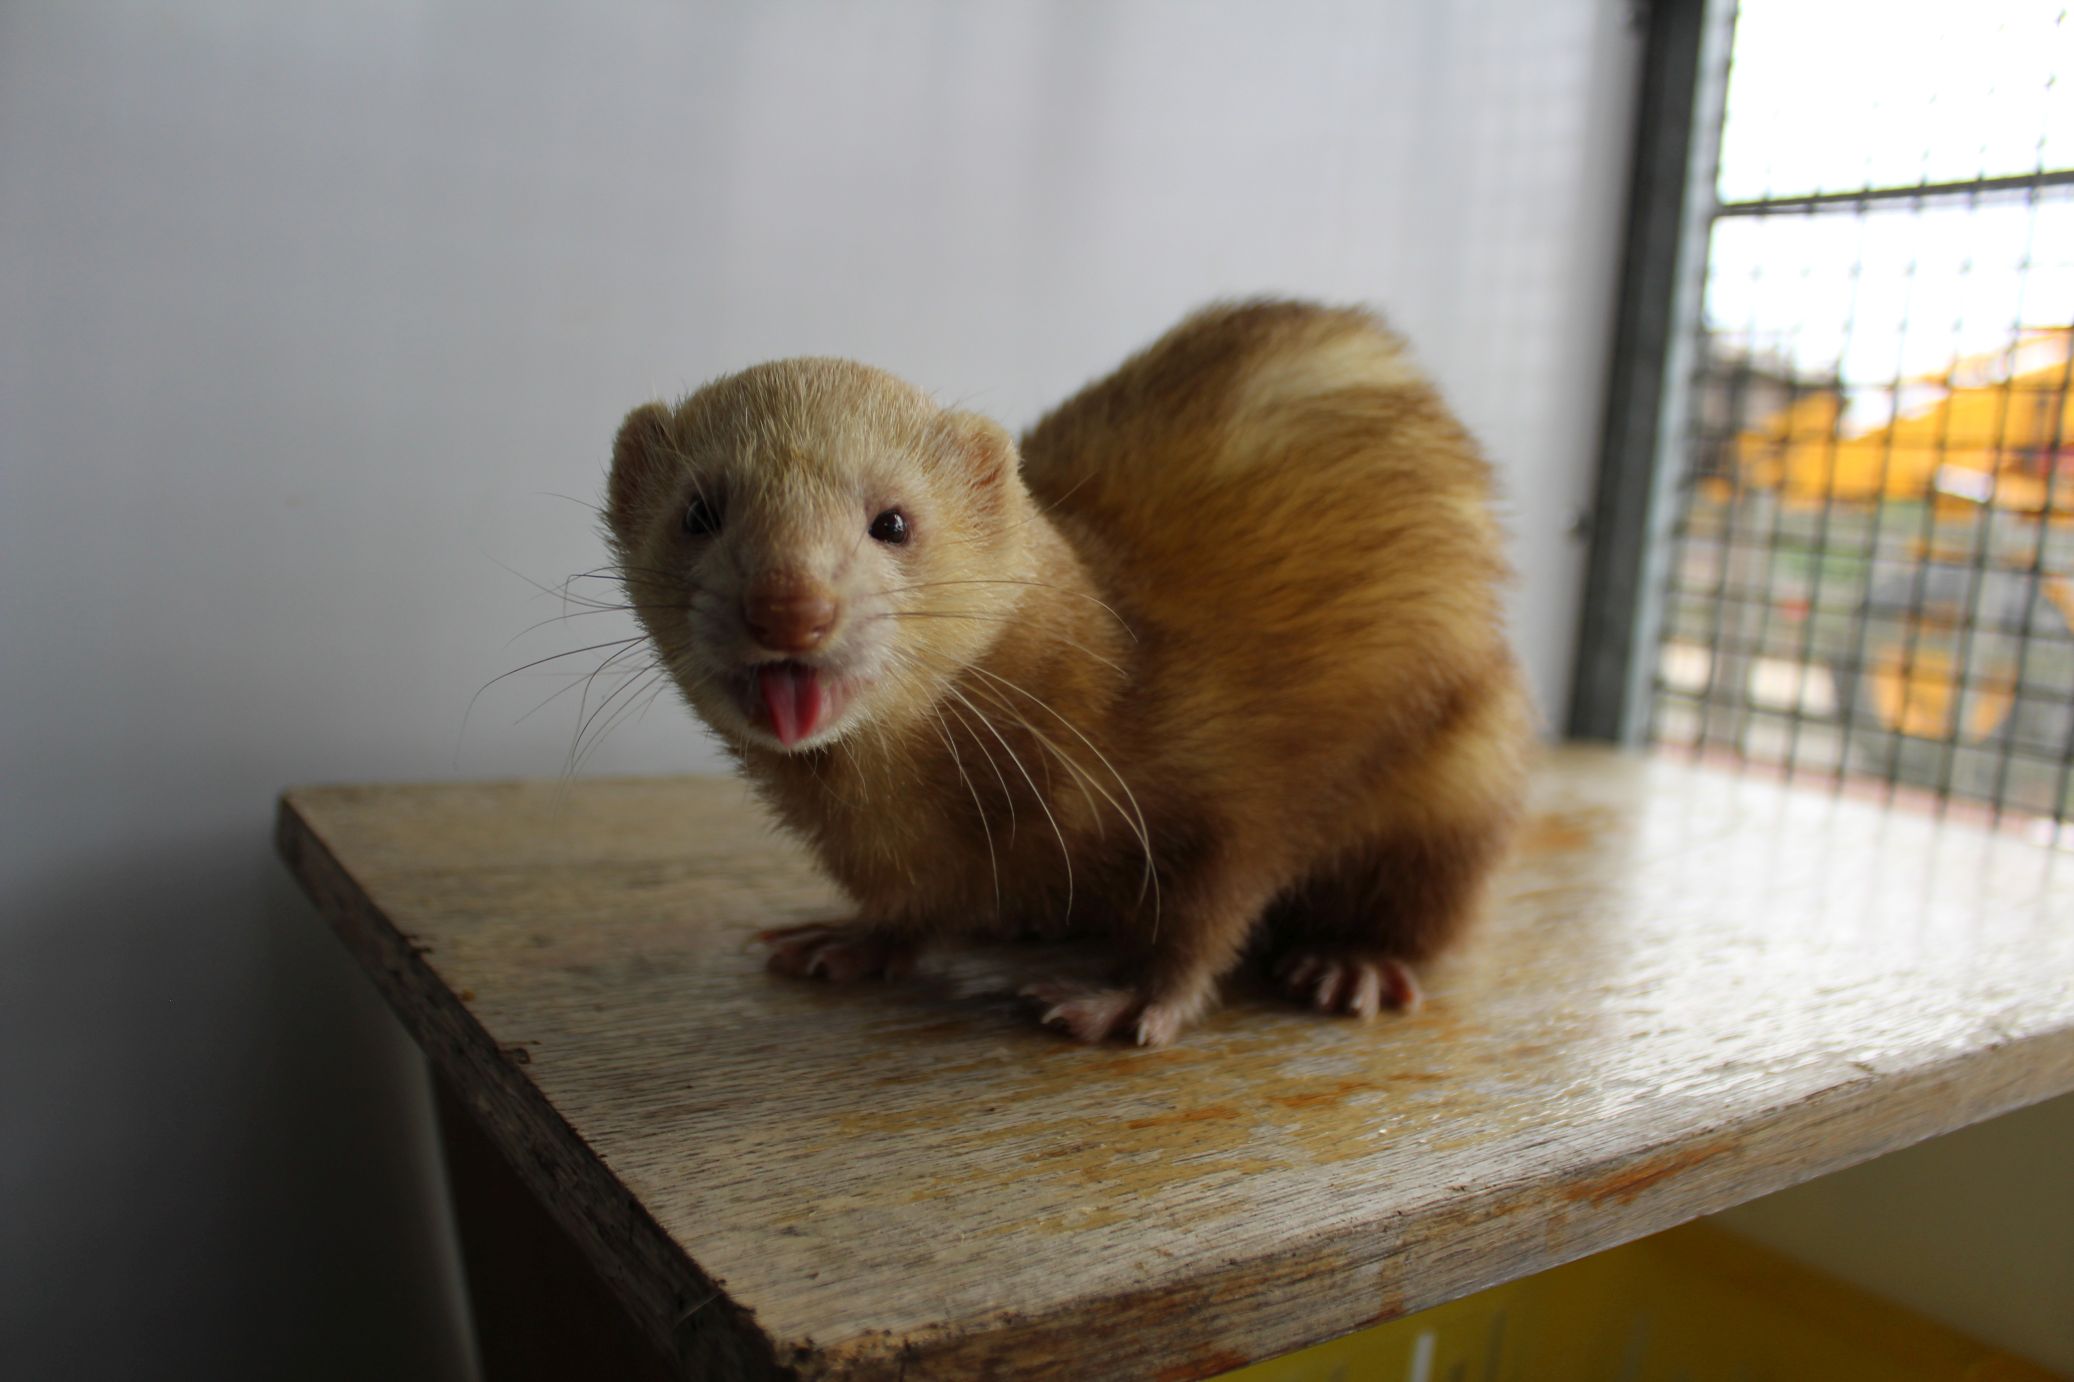 Caring for ferrets